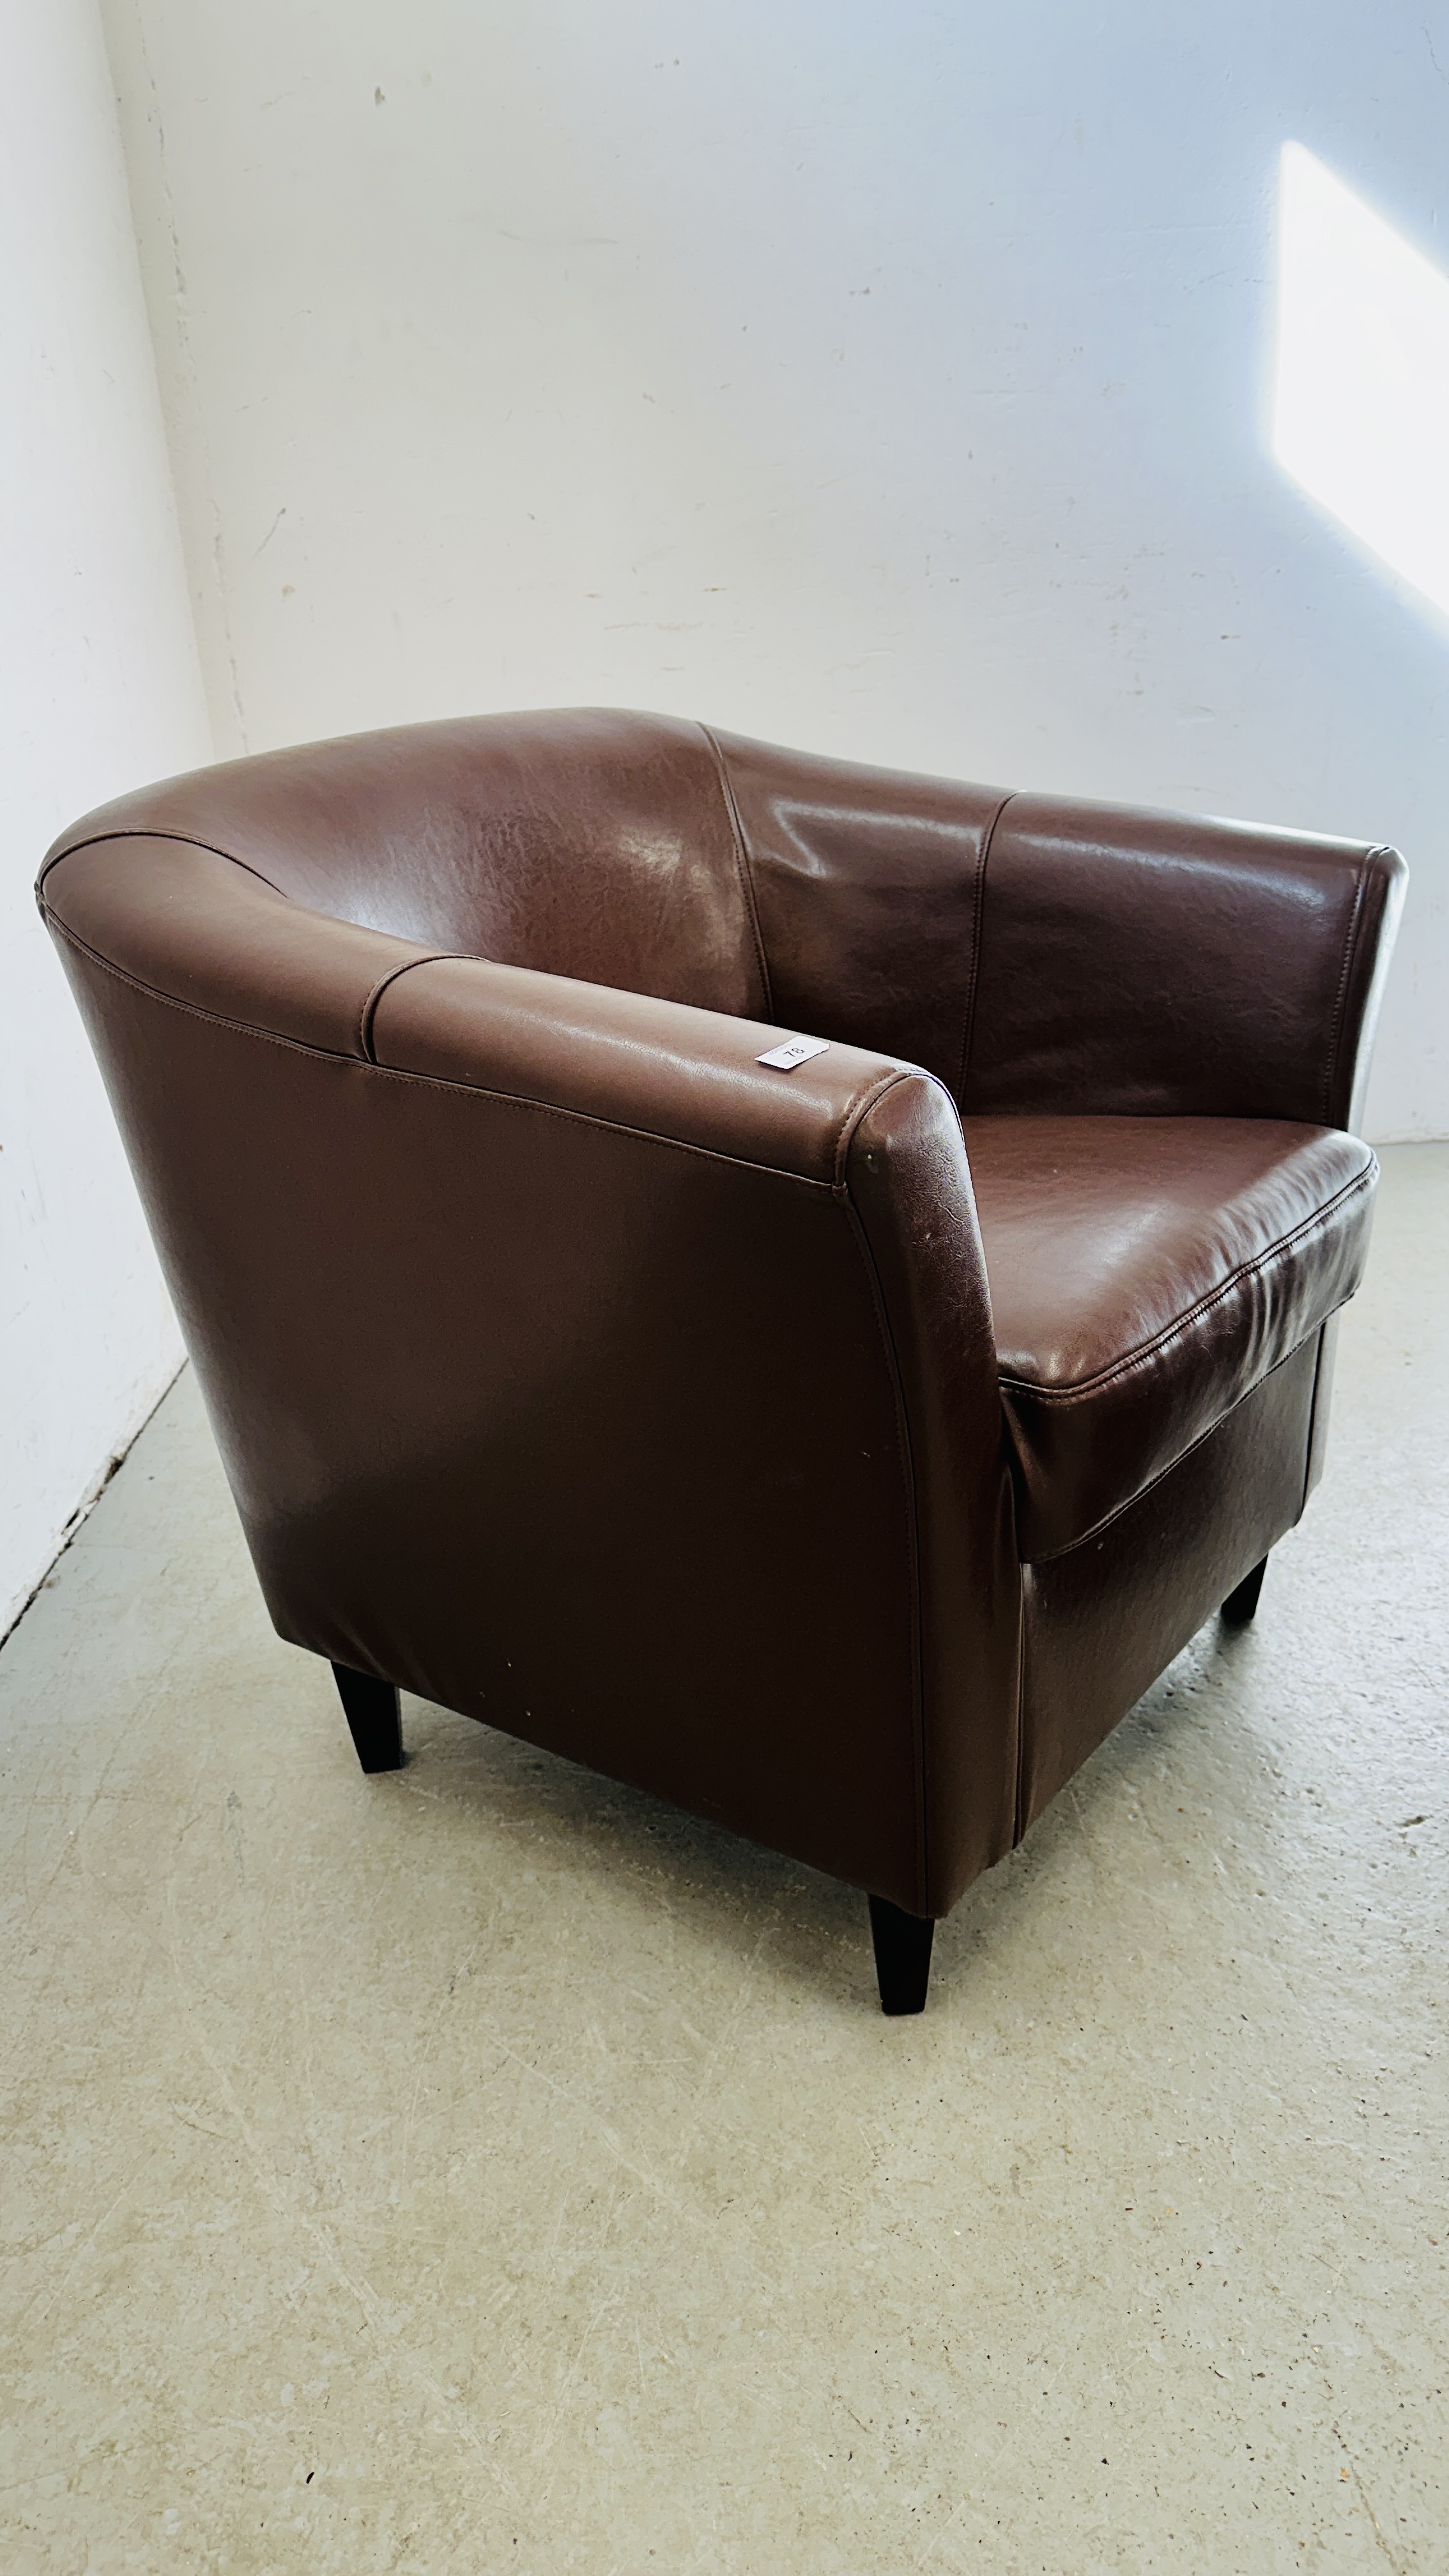 A MODERN BROWN FAUX LEATHER TUB CHAIR ALONG WITH MATCHING BEAN BAG FOOT REST. - Image 4 of 11